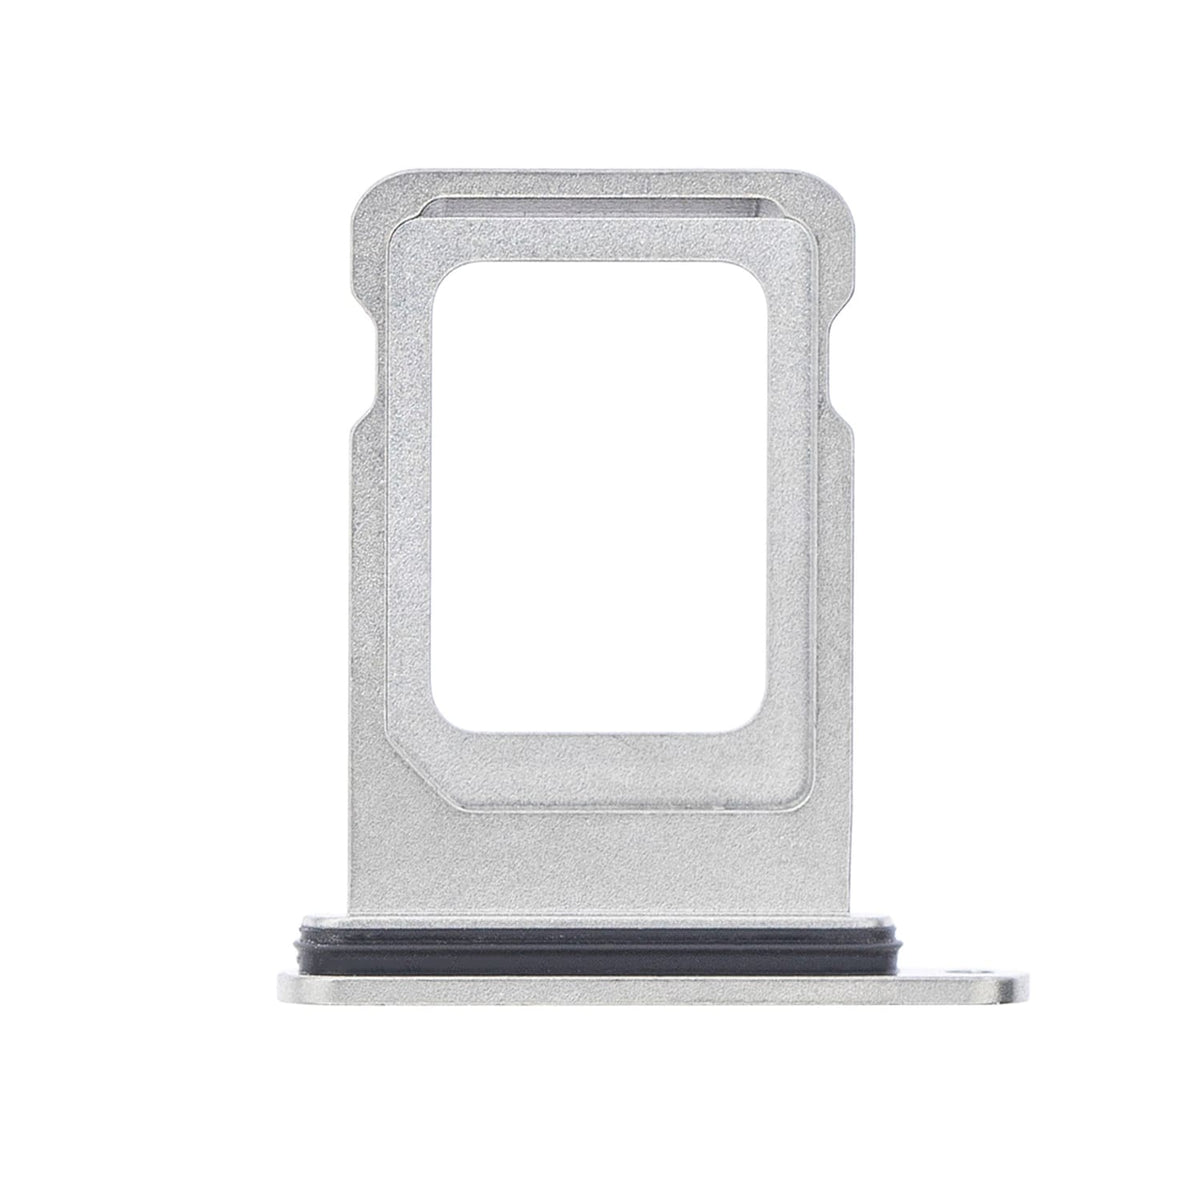 SINGLE SIM CARD TRAY FOR IPHONE 13 PRO/13 PRO MAX  - SILVER